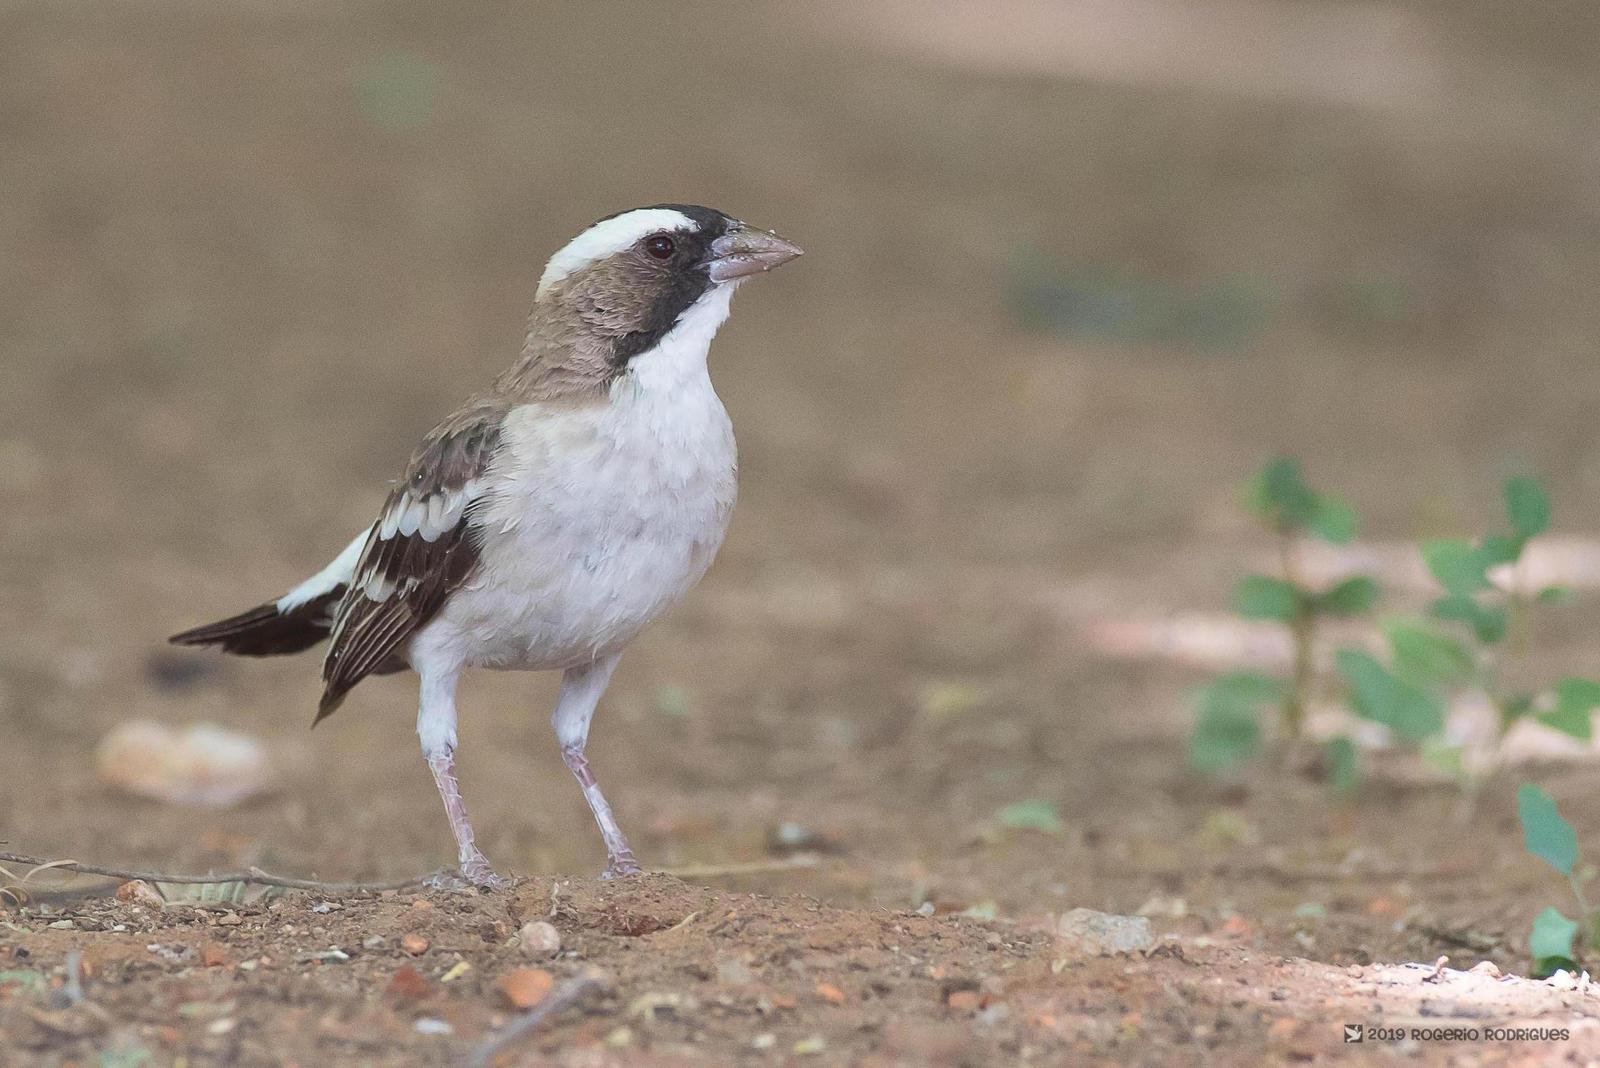 White-browed Sparrow-Weaver Photo by Rogerio Rodrigues 